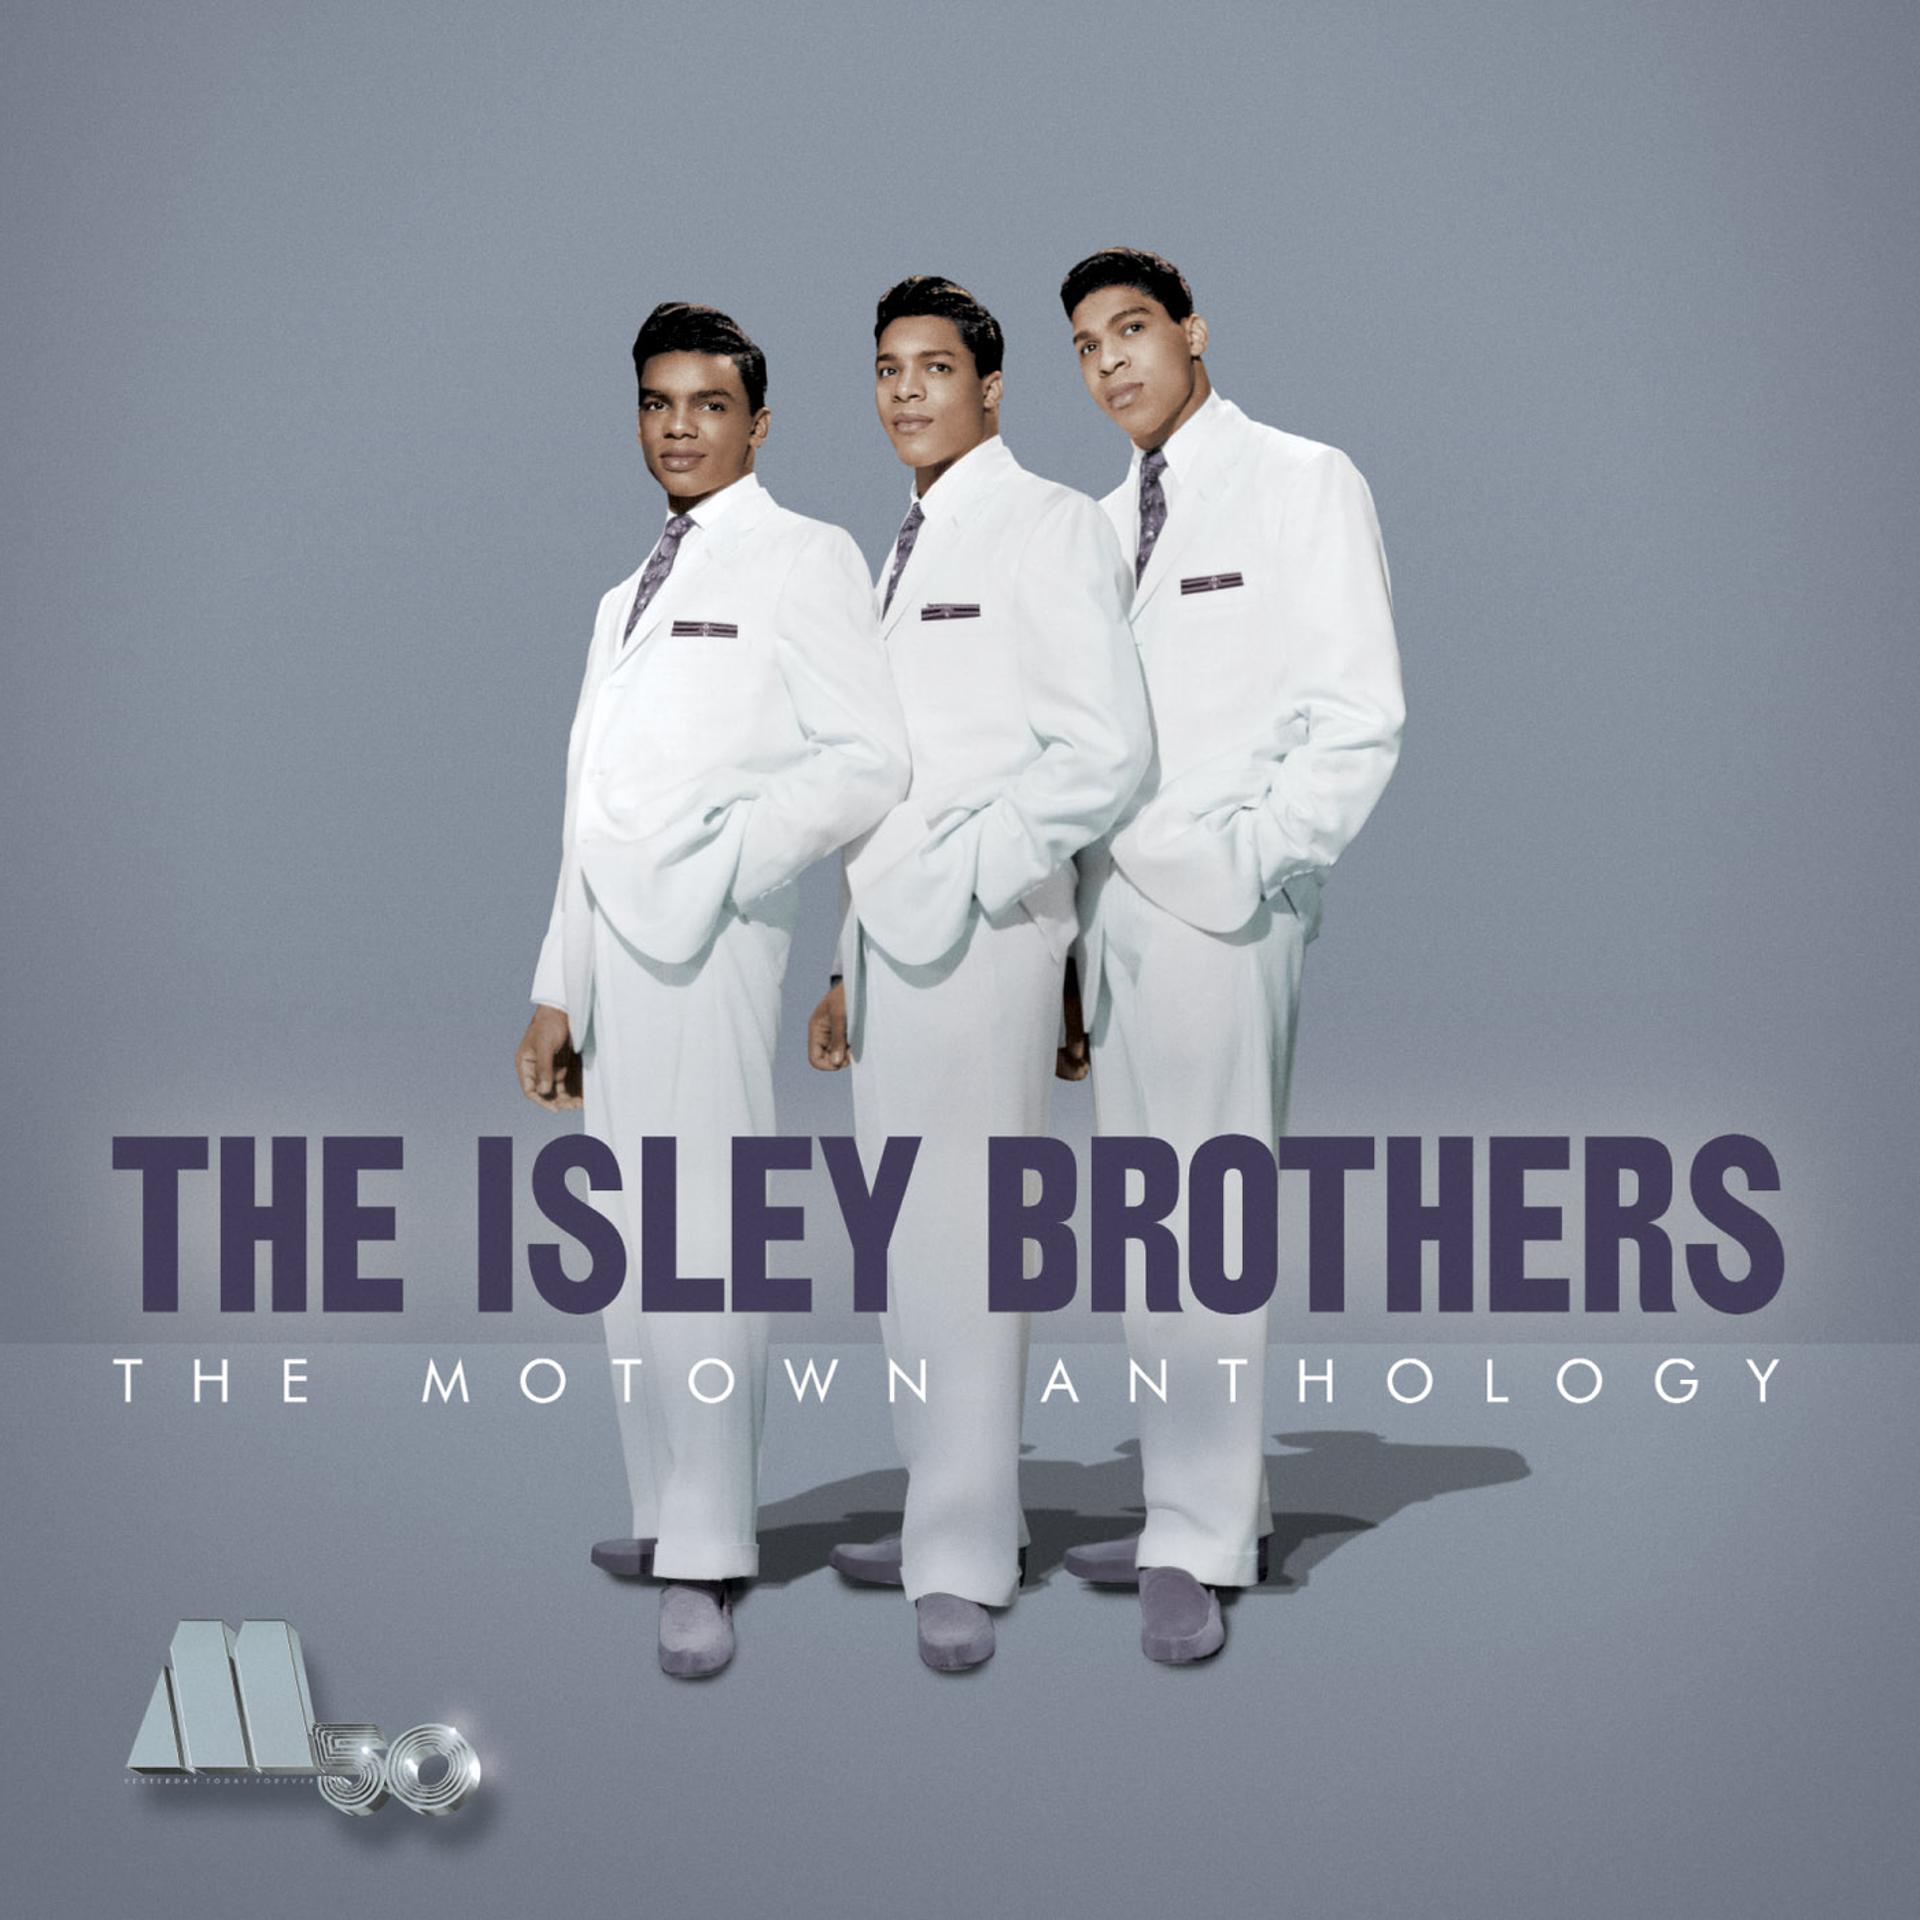 Brothers catch. The Isley brothers. The Isley brothers foto. The Isley brothers the old Heart of mine. The Isley brothers – go all the way.